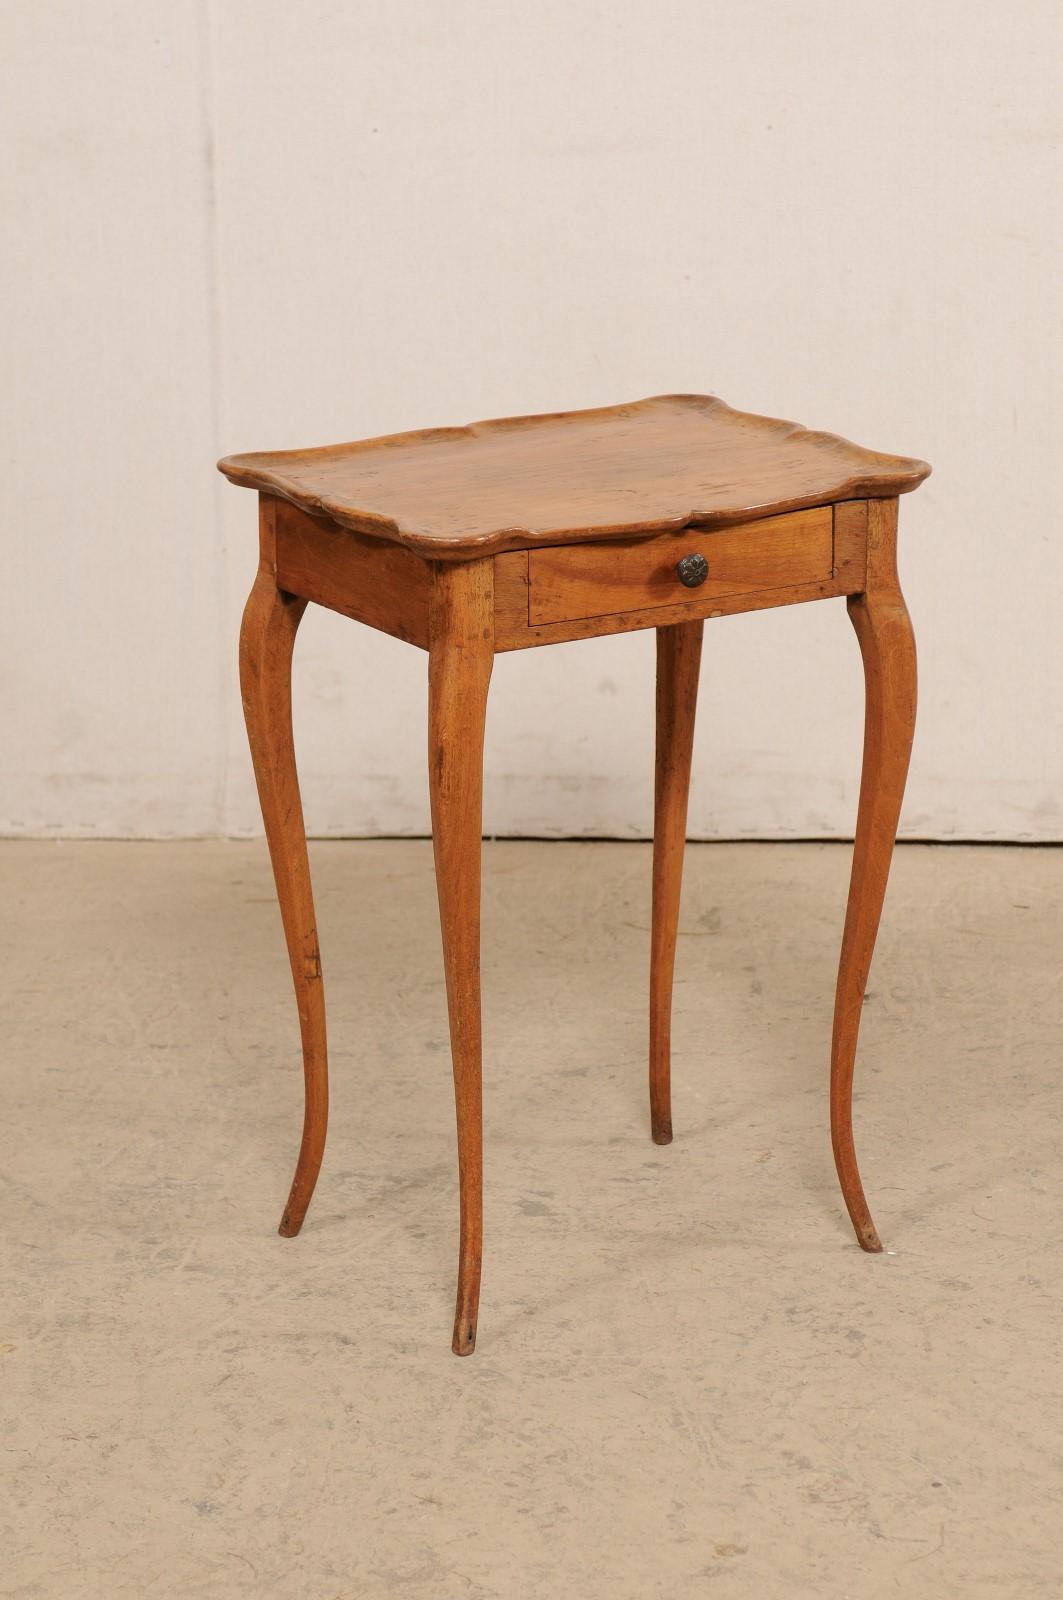 19th century side table